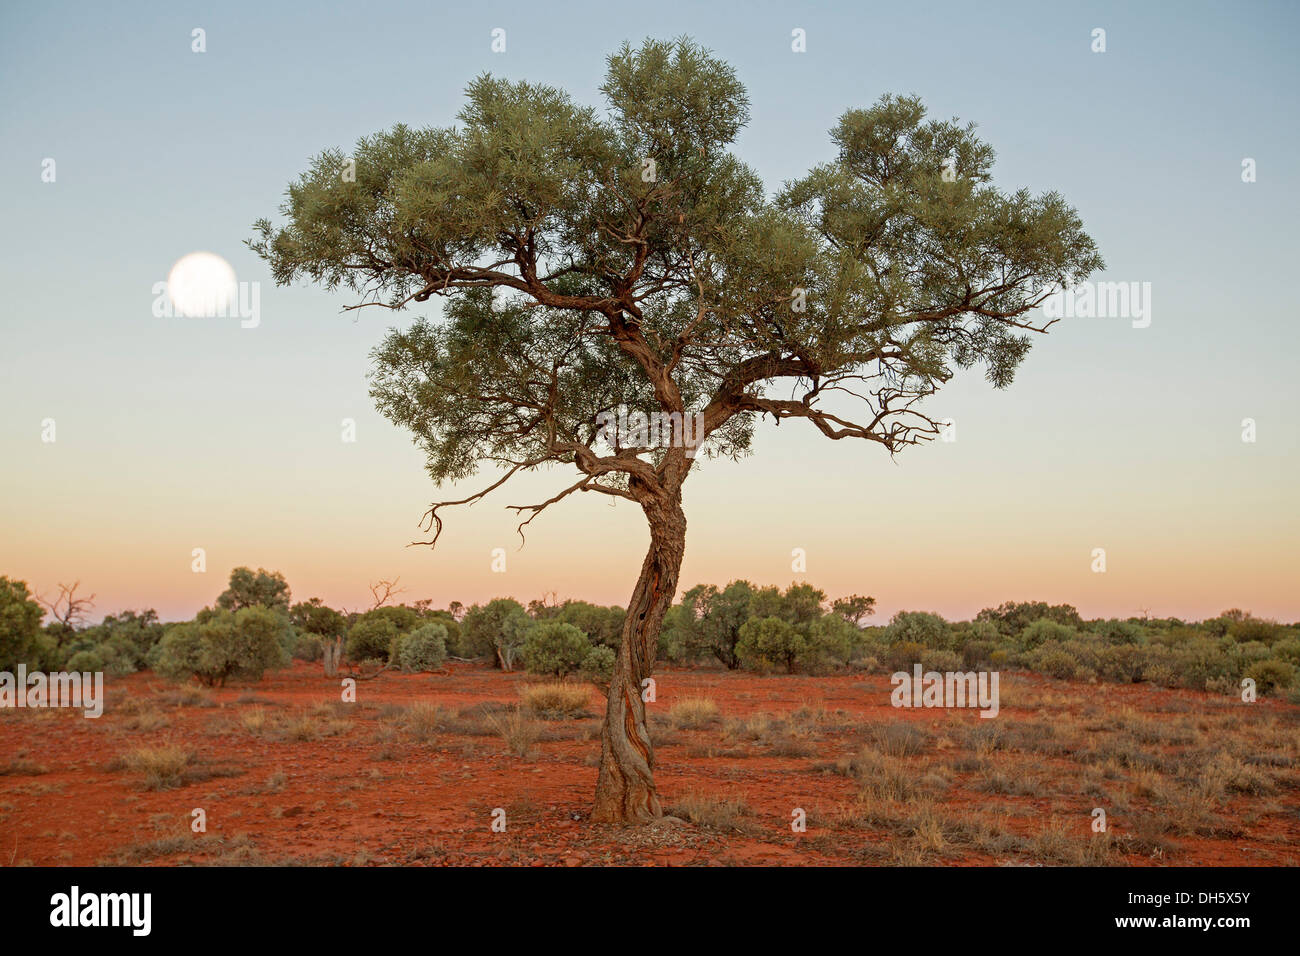 Solitary tree, red soil of plains, pink sky and full moon at dawn in outback Australian landscape in Northern Territory Stock Photo